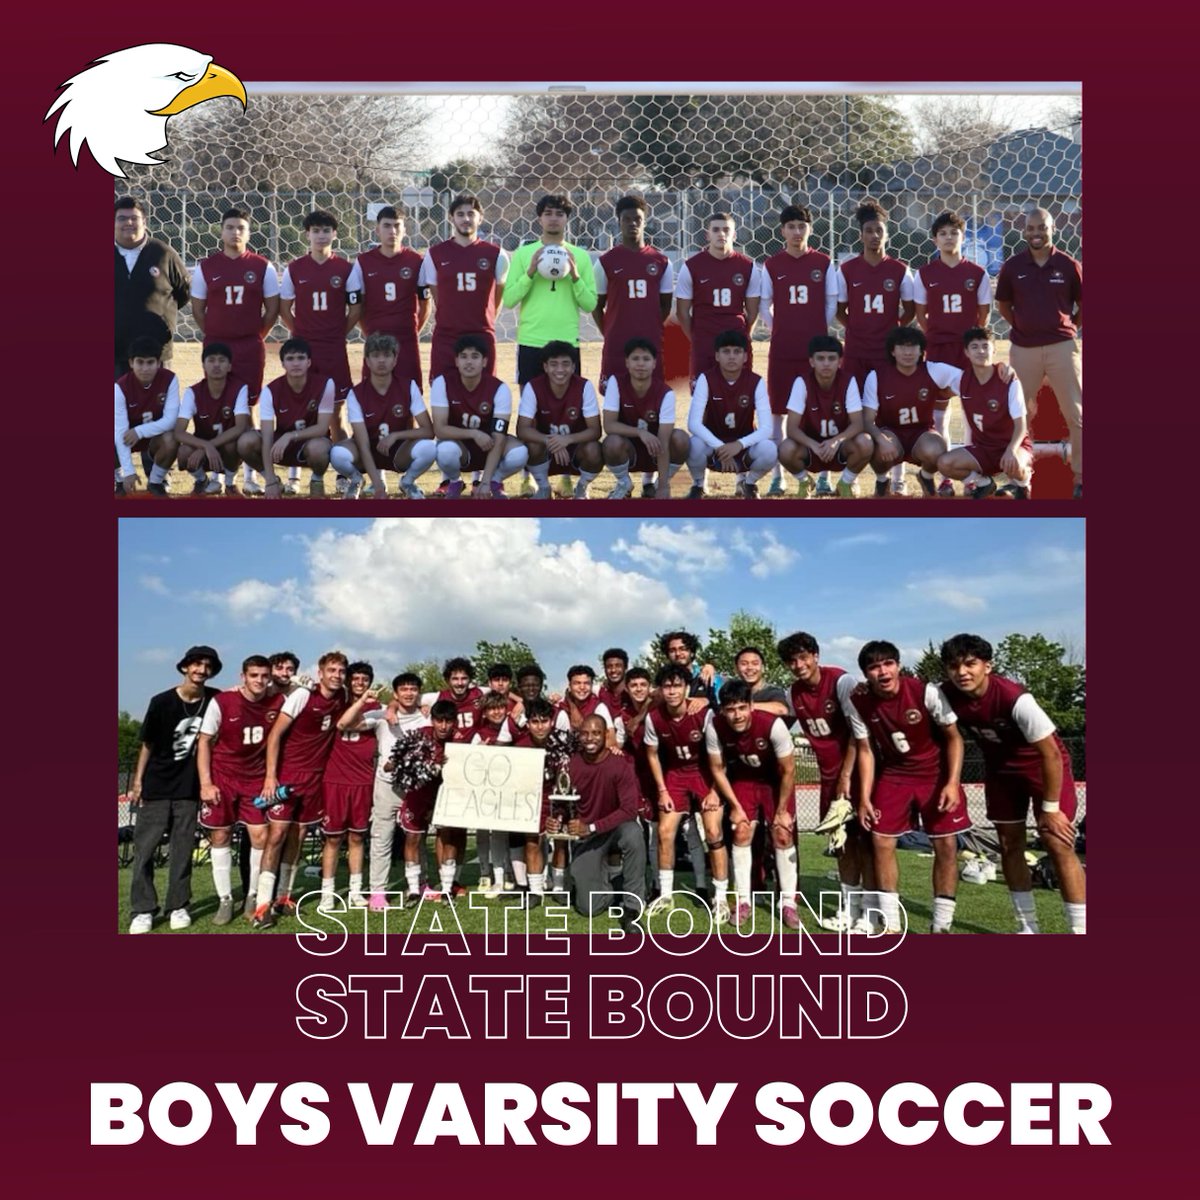 Wishing our ILTexas Garland High School Varsity Boys Soccer team good luck and safe travels as they are headed to the TSCAAL State Soccer Tournament this weekend in Austin! Let’s cheer them on as they continue to make #ILTexas proud!